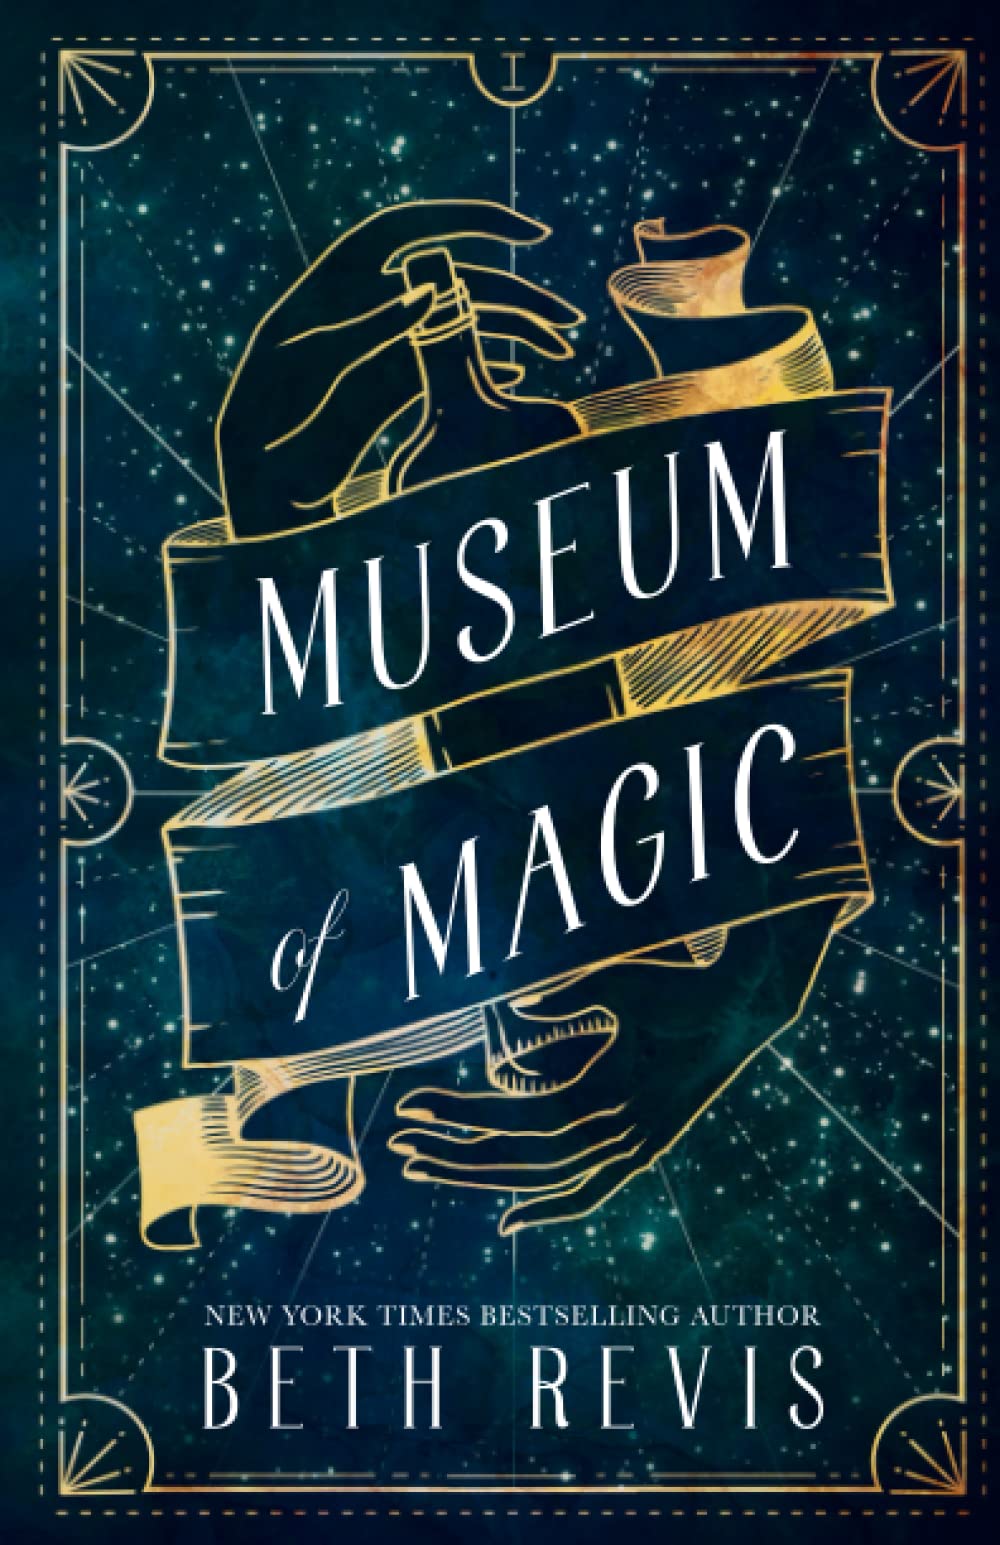 Museum of Magic by Beth Revis PDF Download